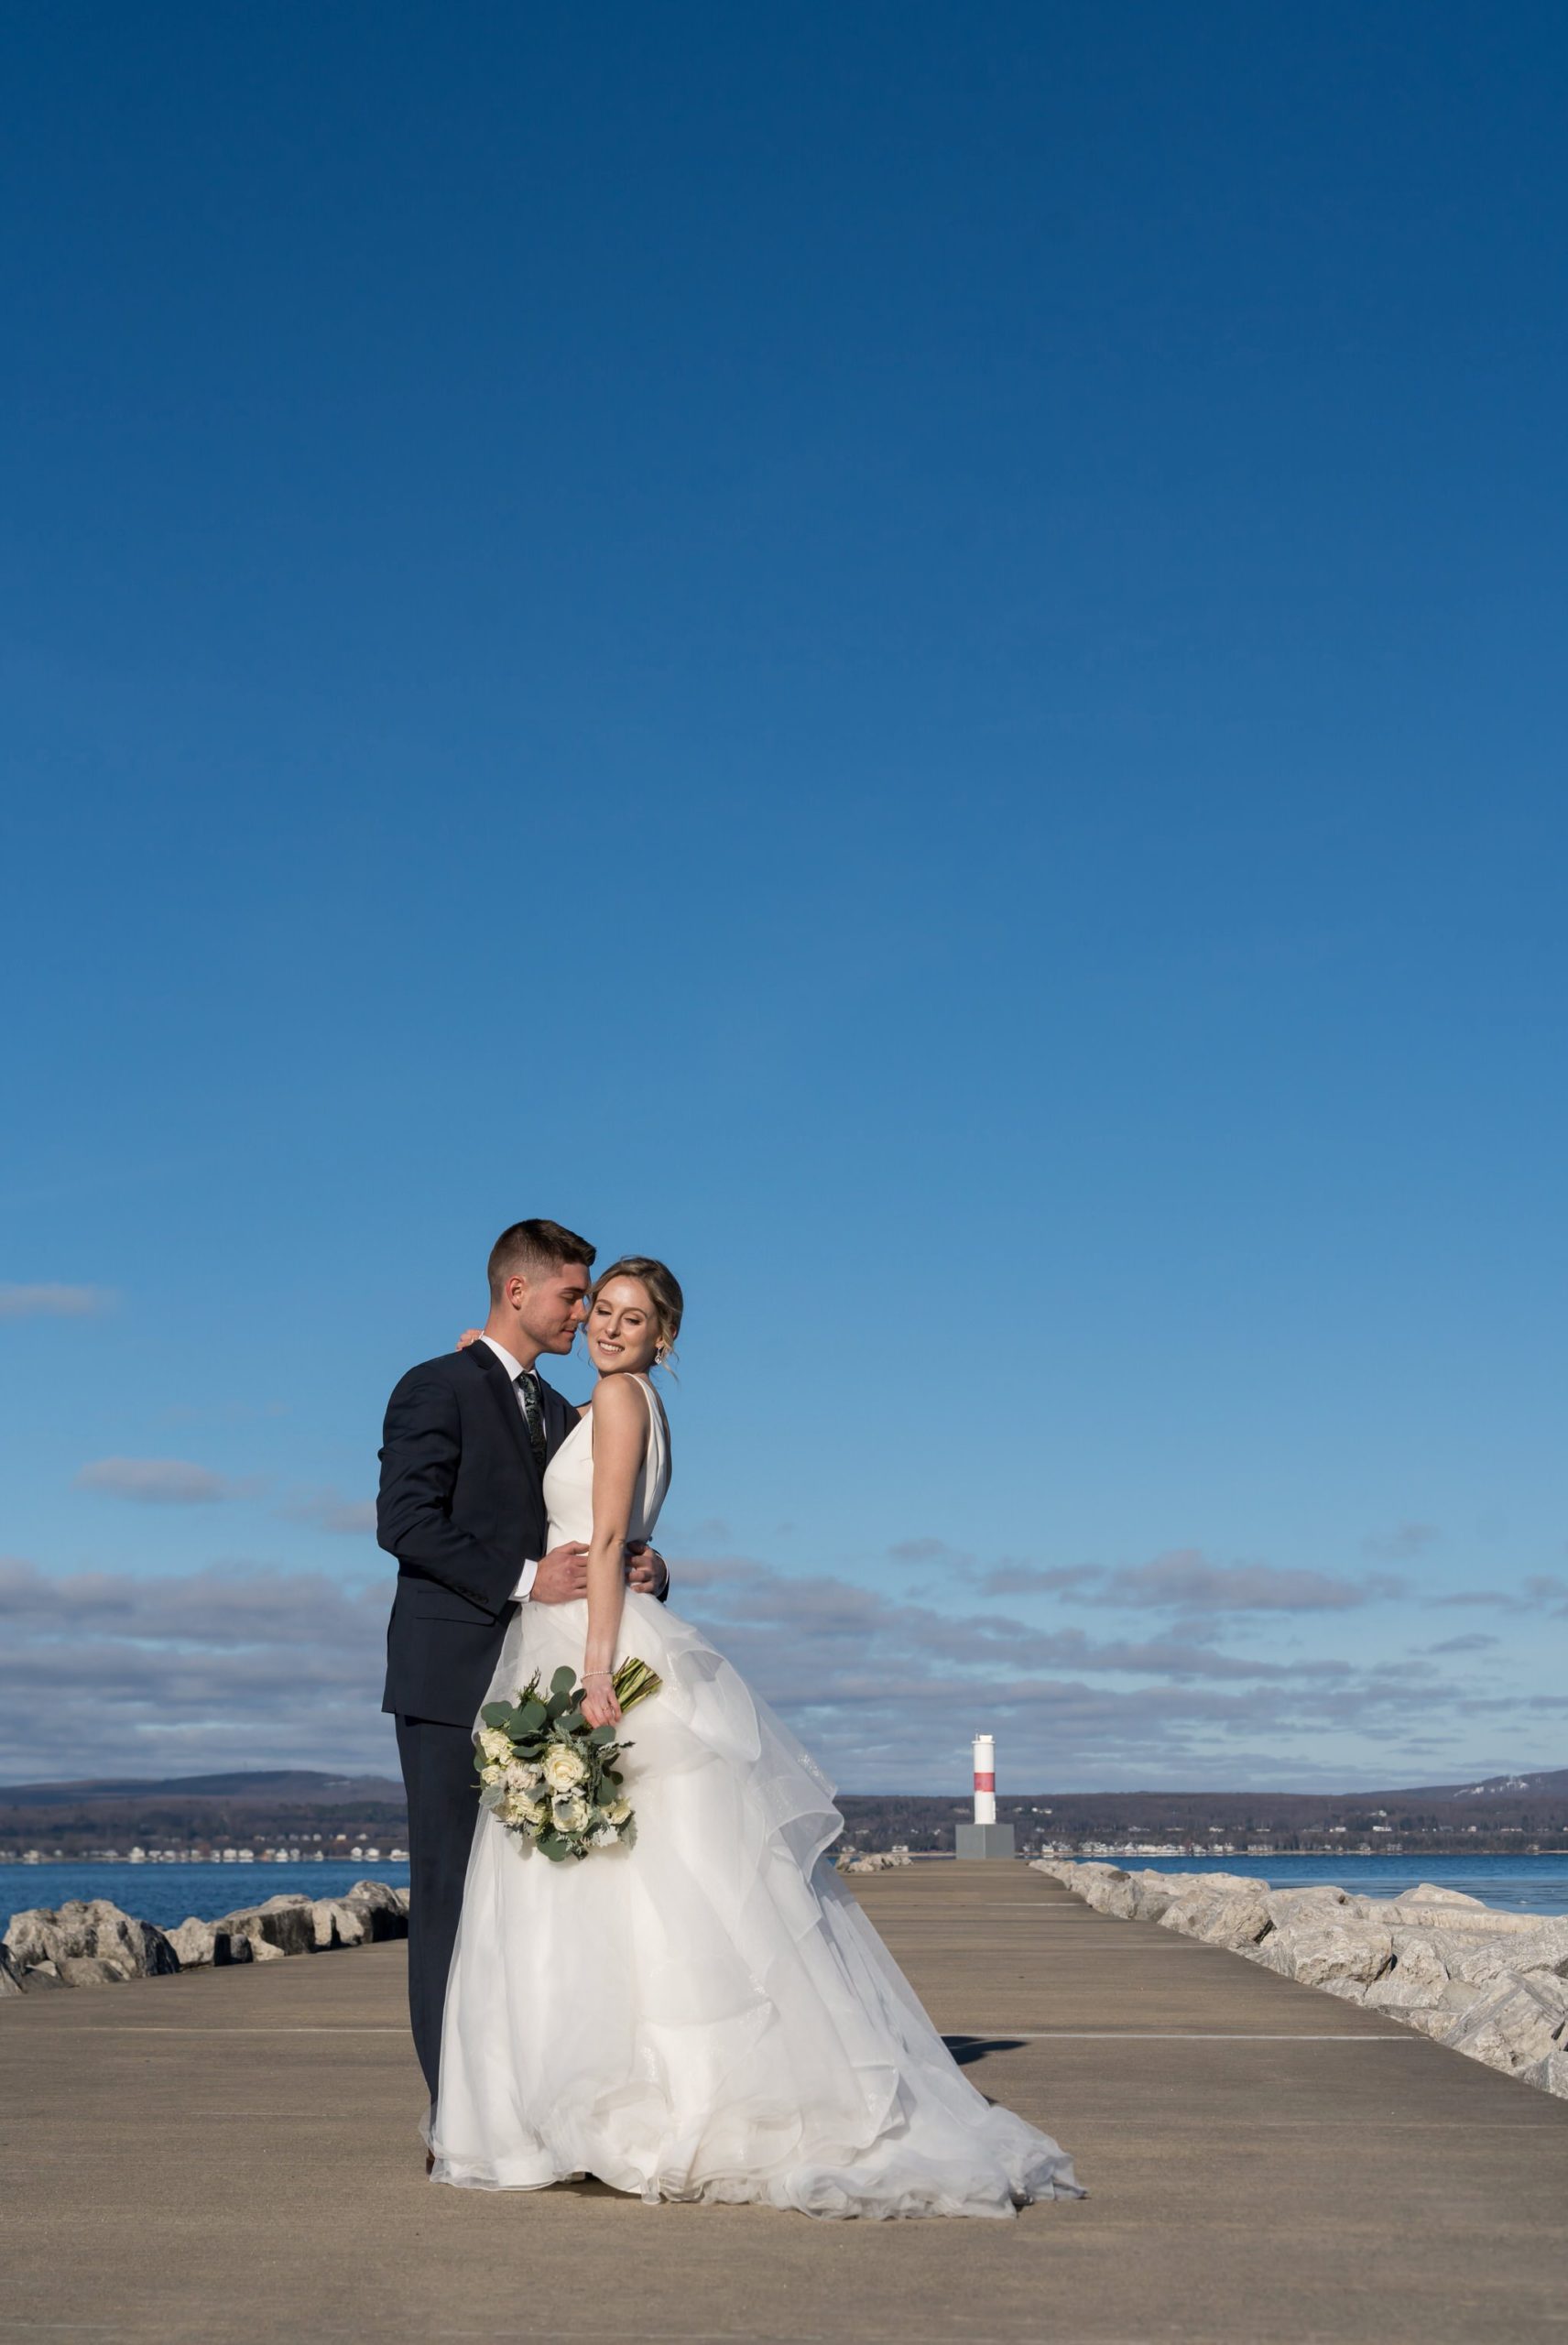 A bride and groom embrace near the Petoskey Pierhead Lighthouse before their Bay Harbor wedding ceremony.  